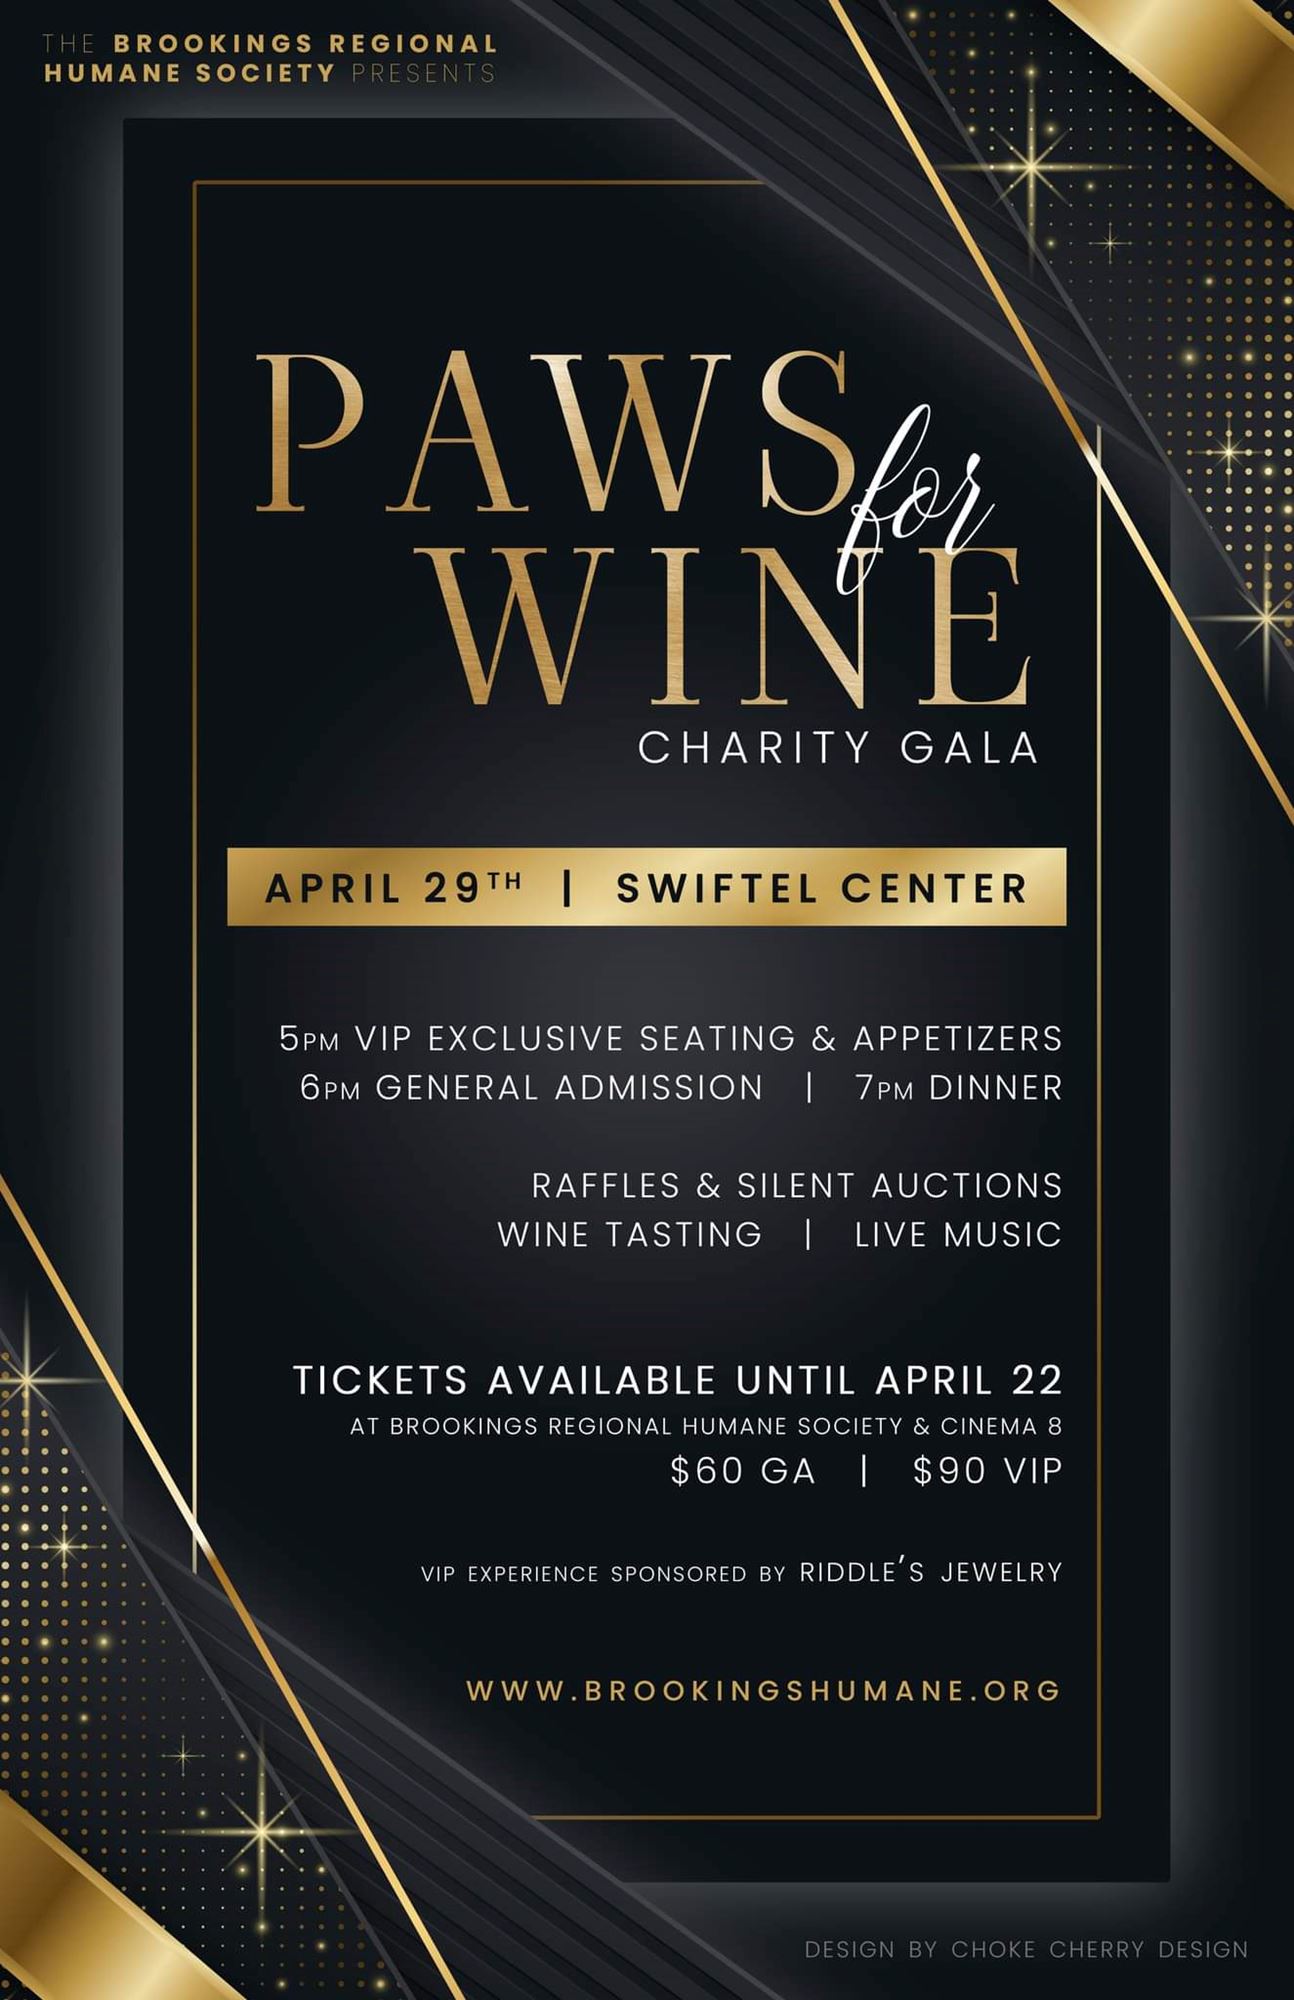 Paws for Wine Charity Gala